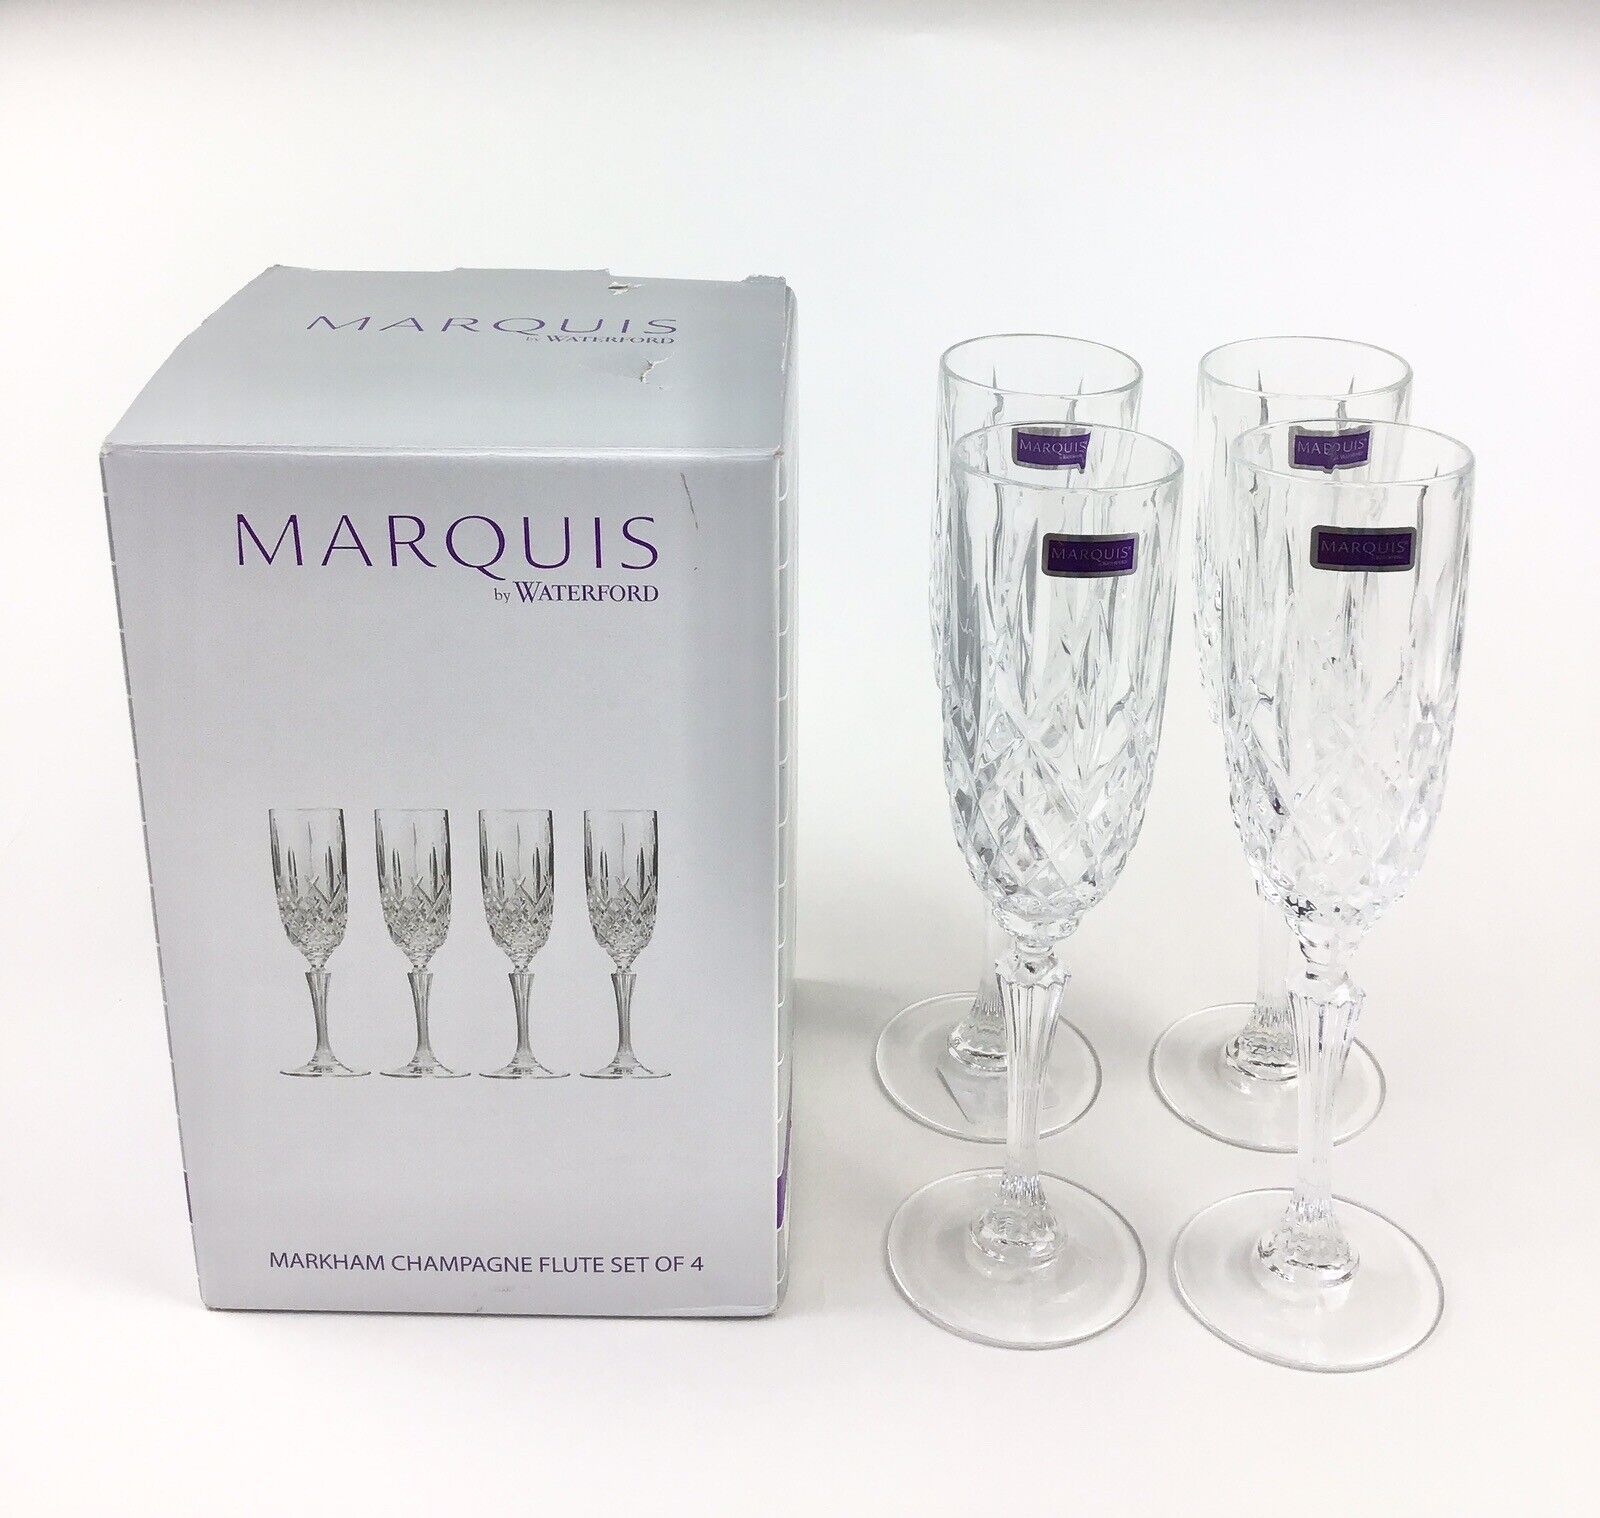 Marquis By Waterford Markham Champagne Flutes Crystal Glasses Set of 4 NEW $100